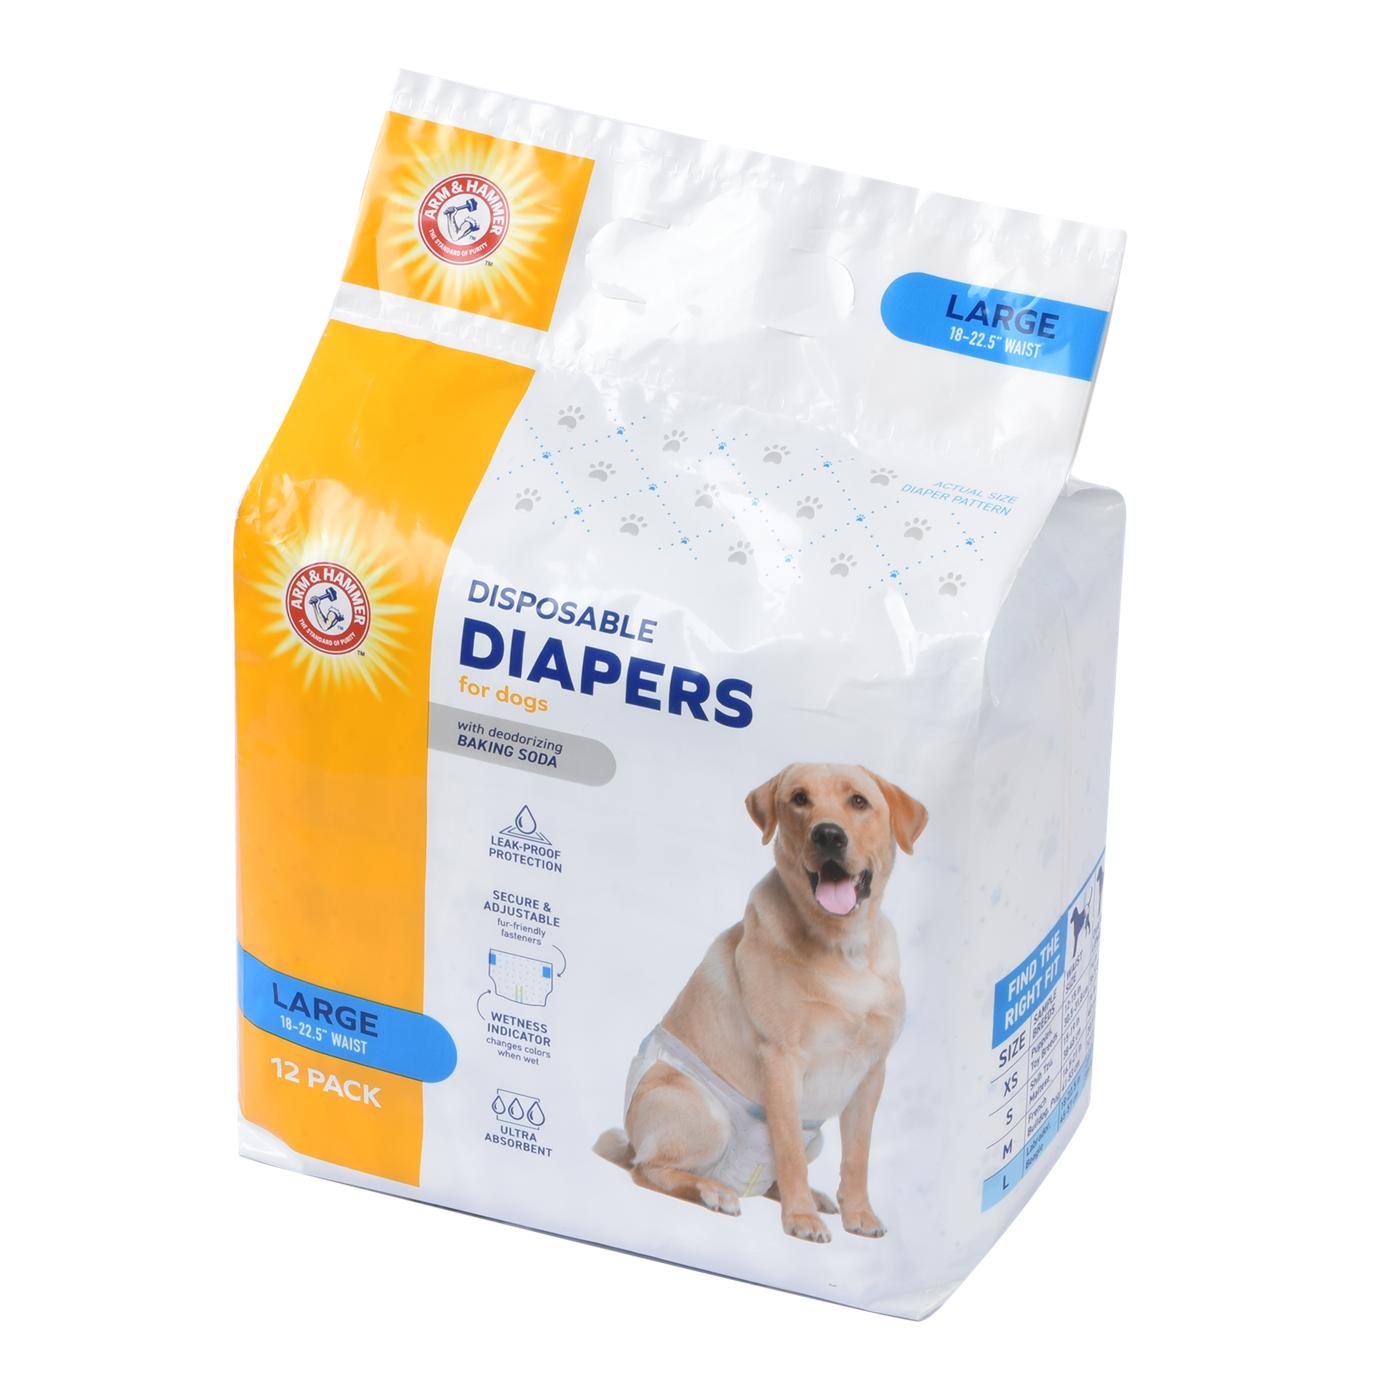 Arm & Hammer Disposable Dog Diapers - Large; image 2 of 2